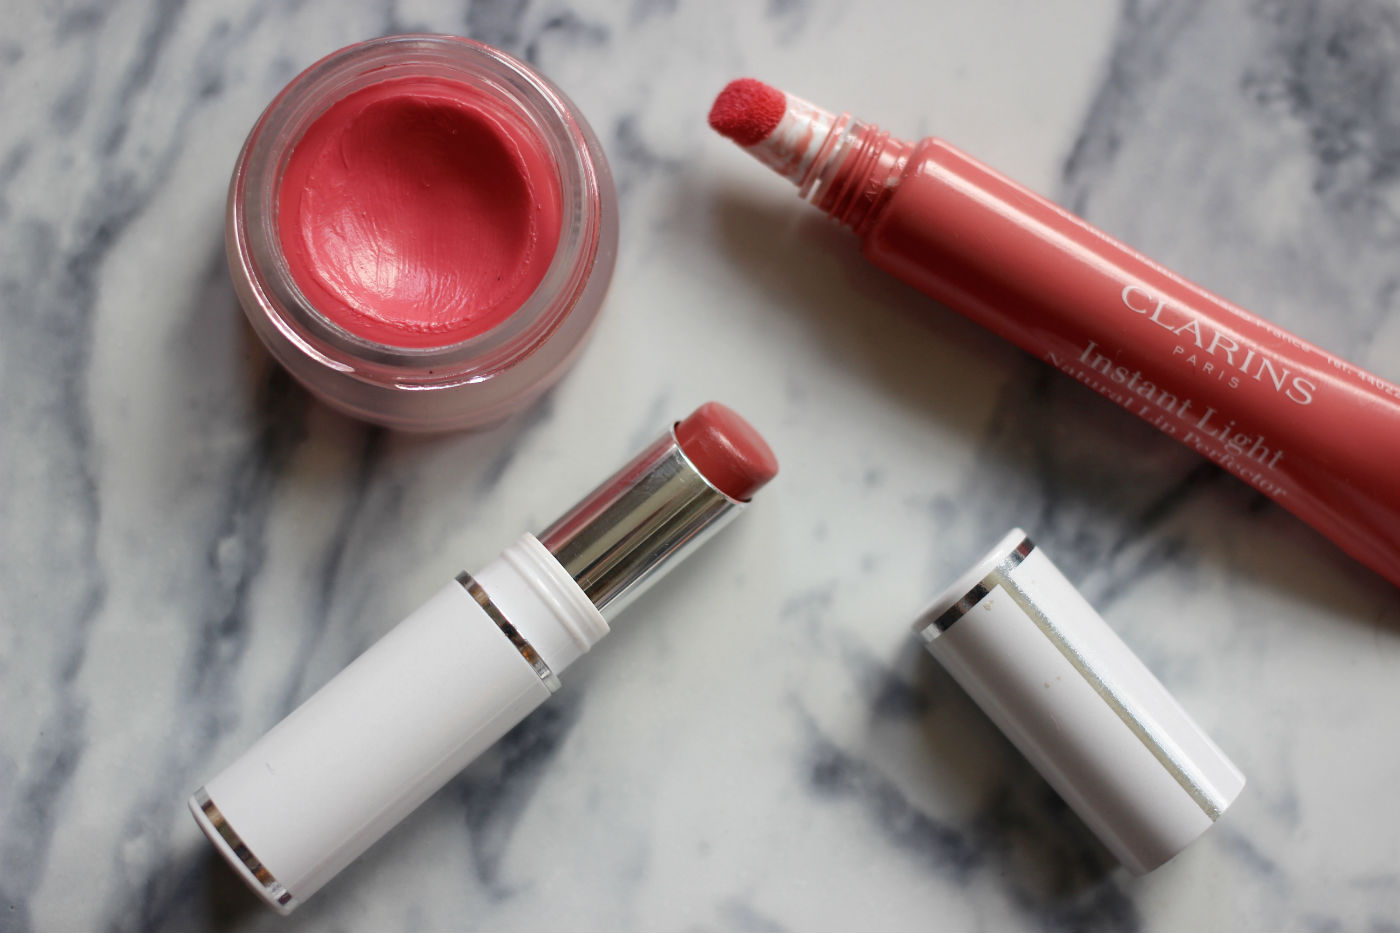 The Lazy Everyday Nude Lip Lily Pebbles